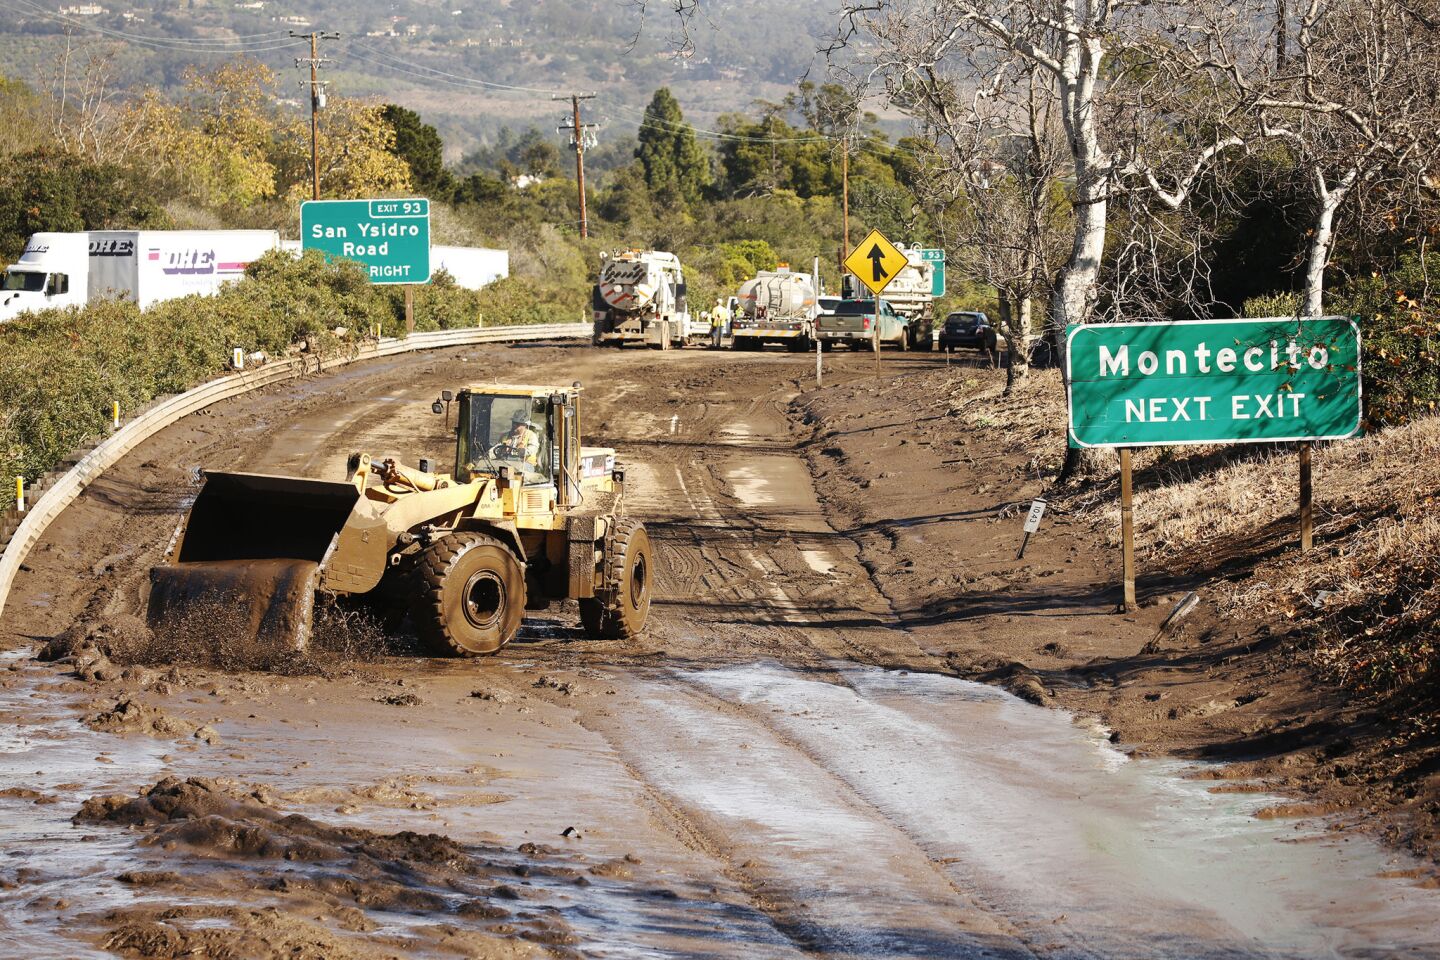 Crews work to clear debris from the closed 101 Freeway at Olive Mill Road in Montecito.